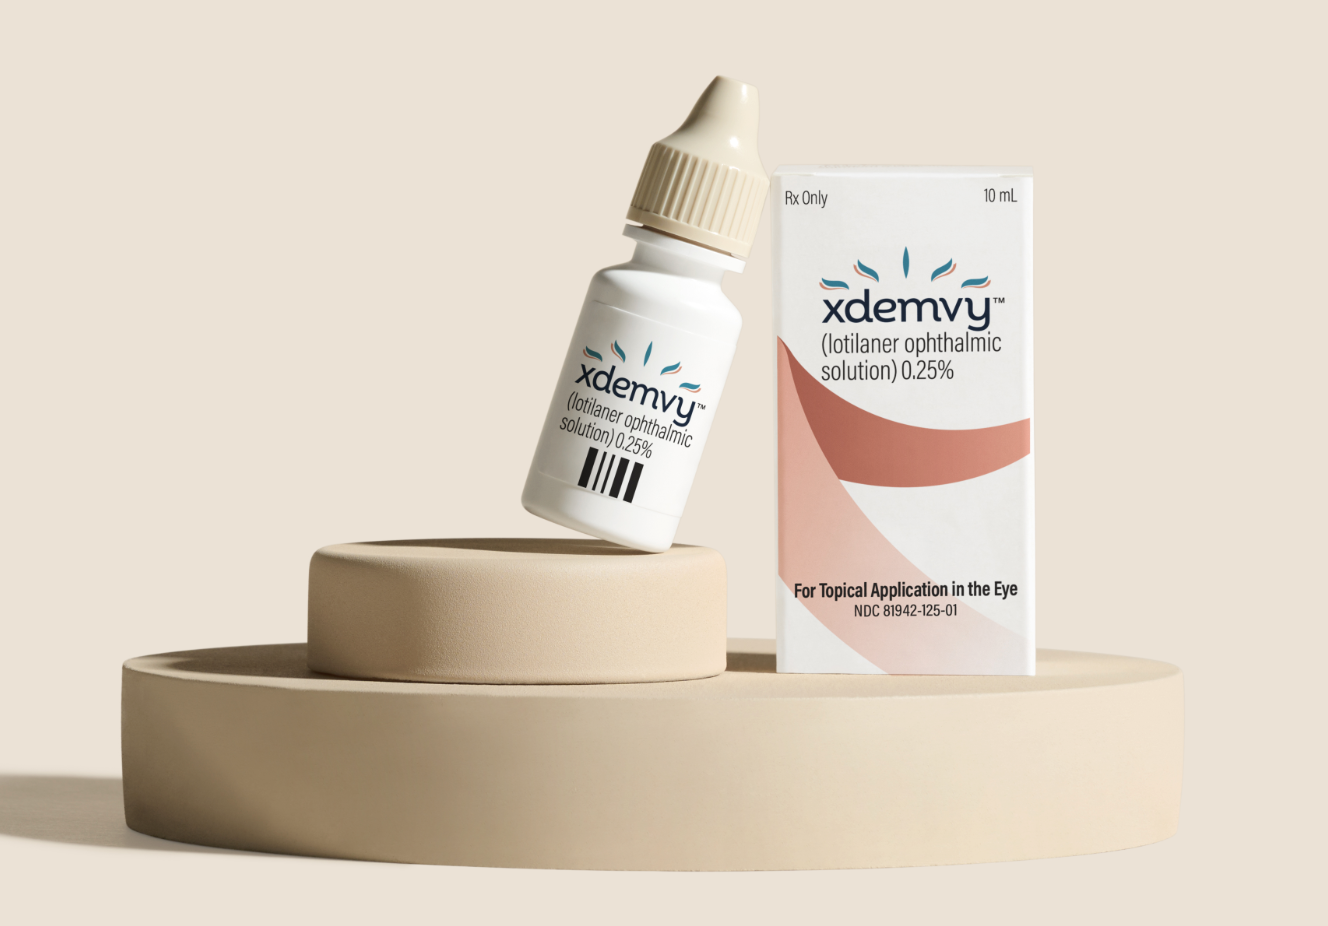 Tarsus just announced the approval of the first topical therapeutic to treat Demodex blepharitis, called Xdemvy.